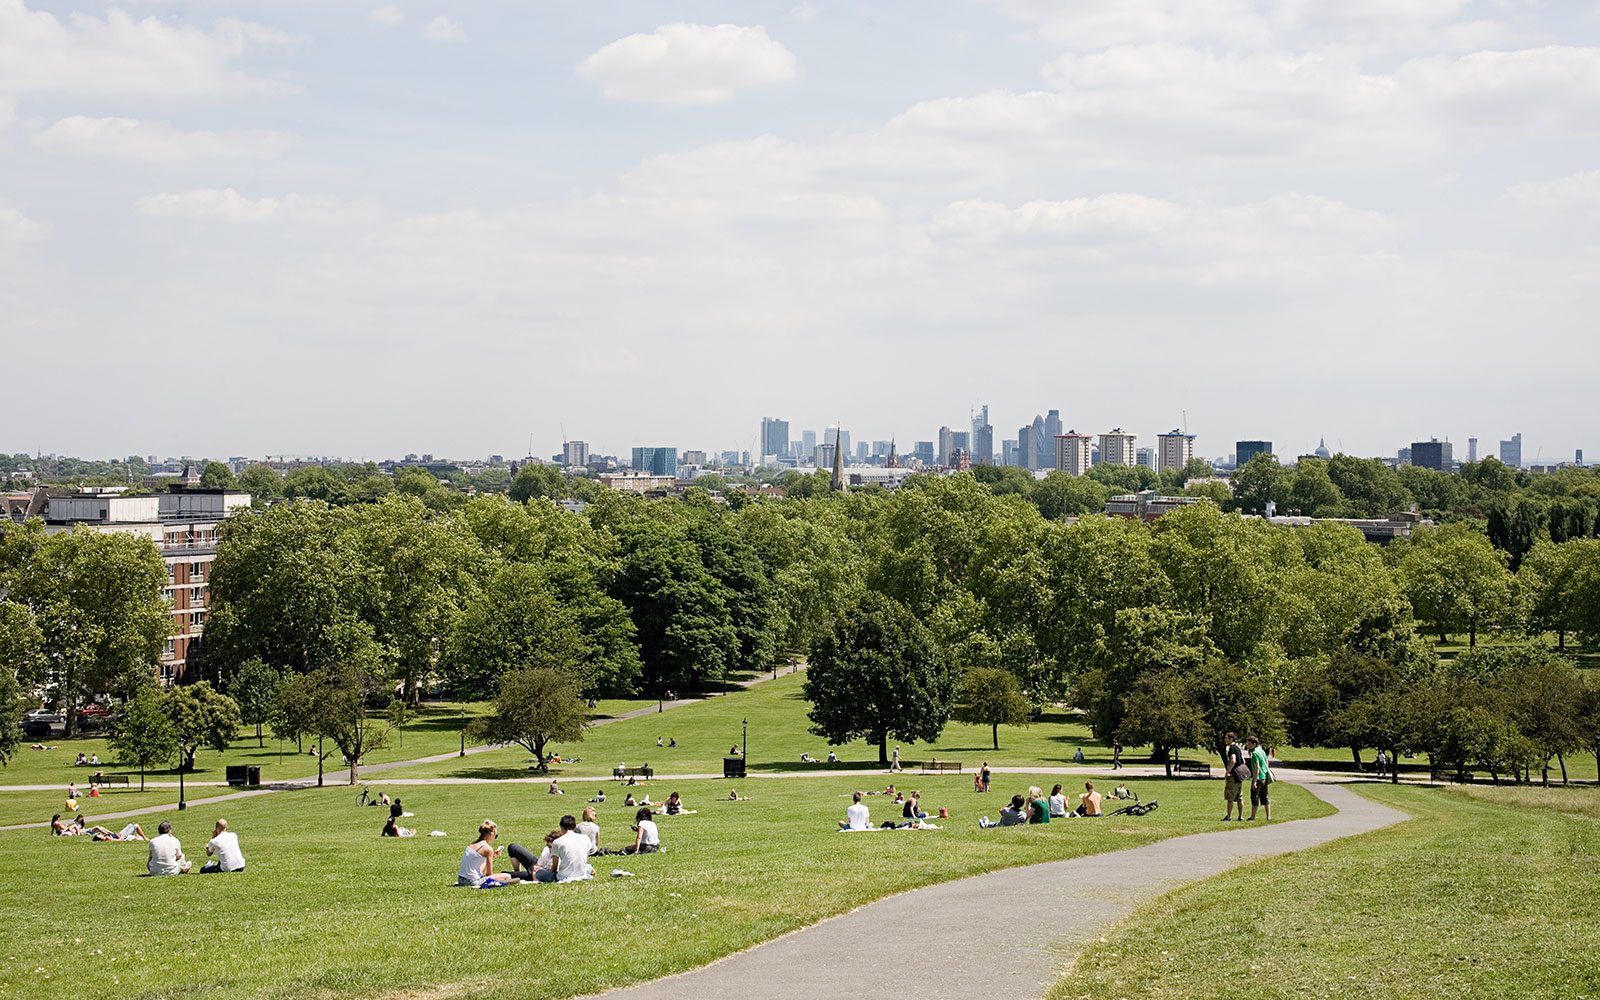 21 Things You Can Do in London That Are Free